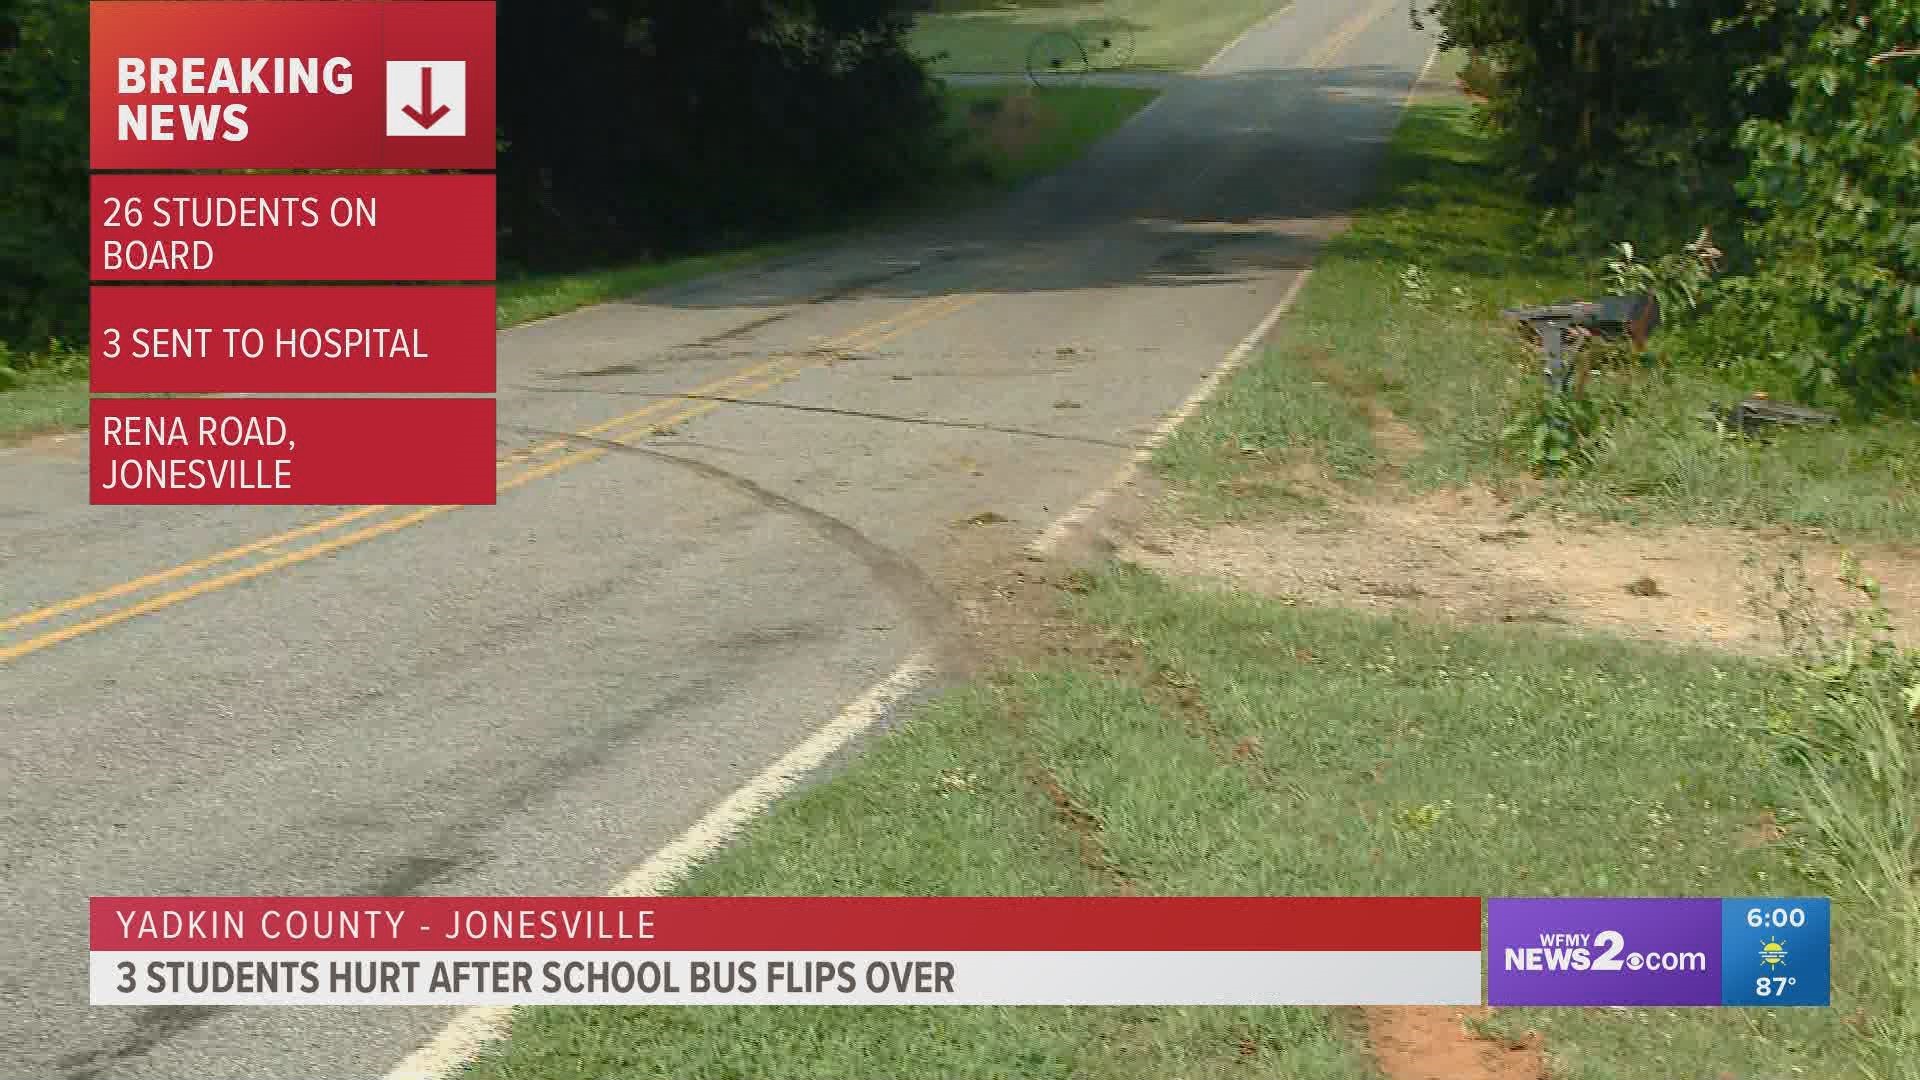 The school district said the Jonesville Elementary school bus overturned Wednesday afternoon.